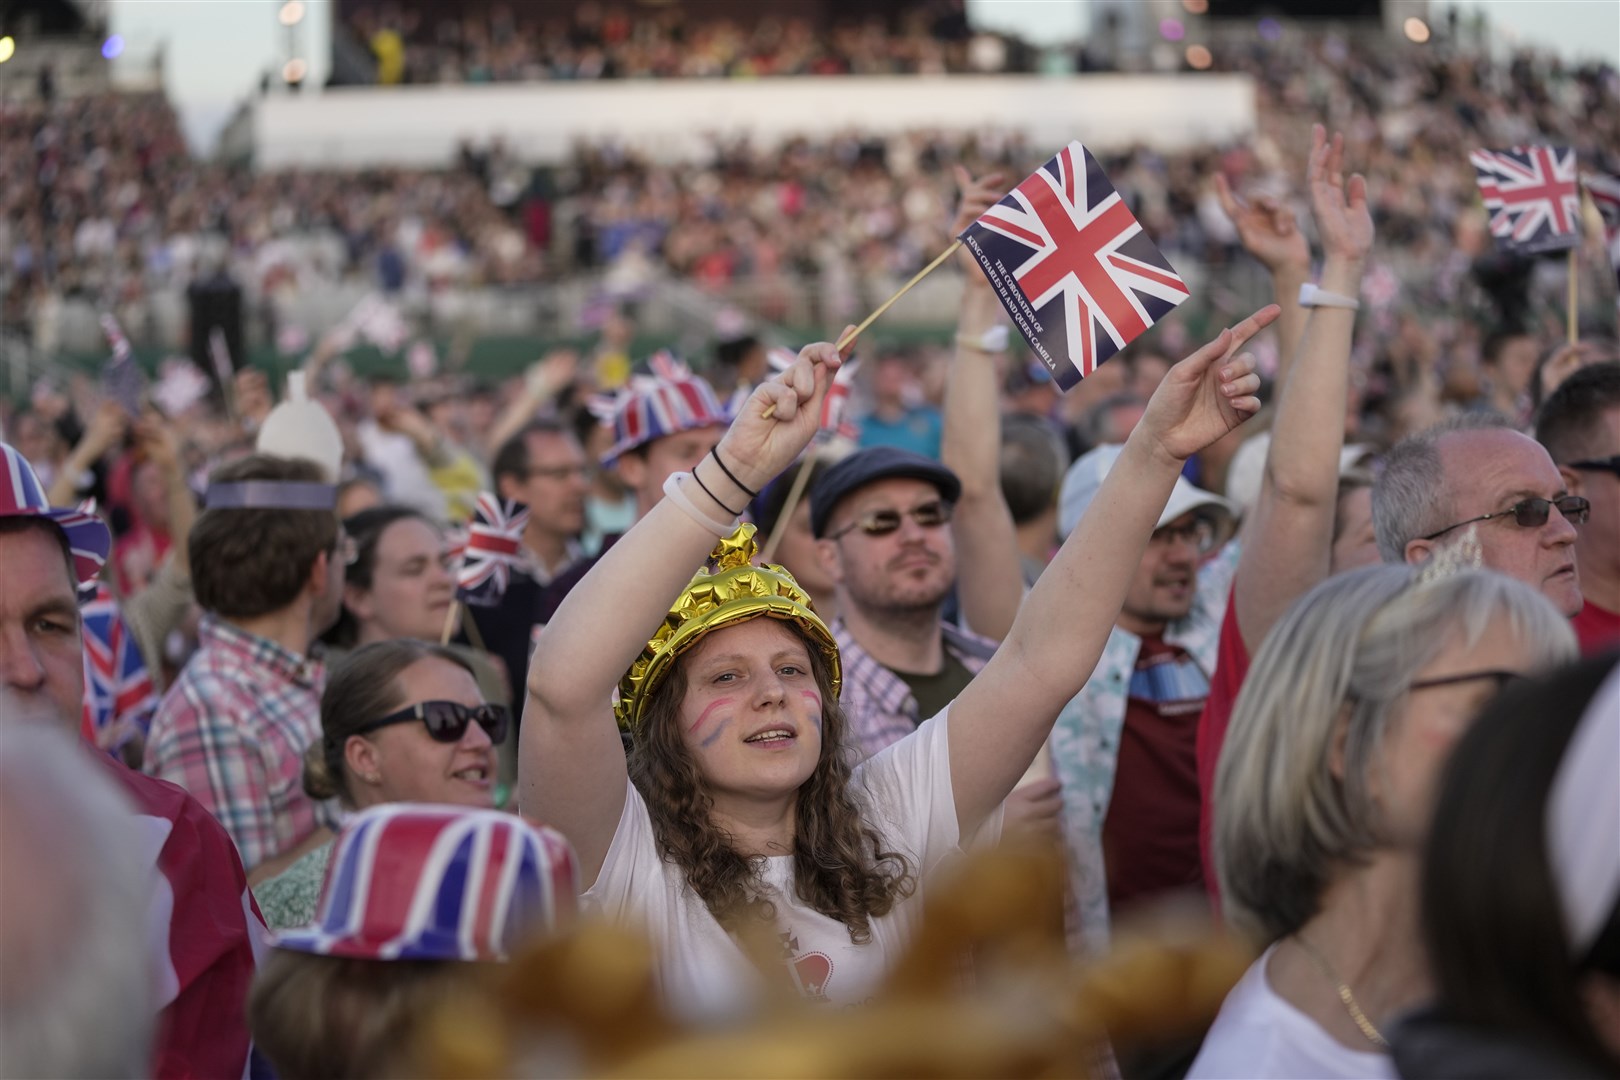 The coronation bank holiday in May caused the UK economy to contract (Kin Cheung/PA)